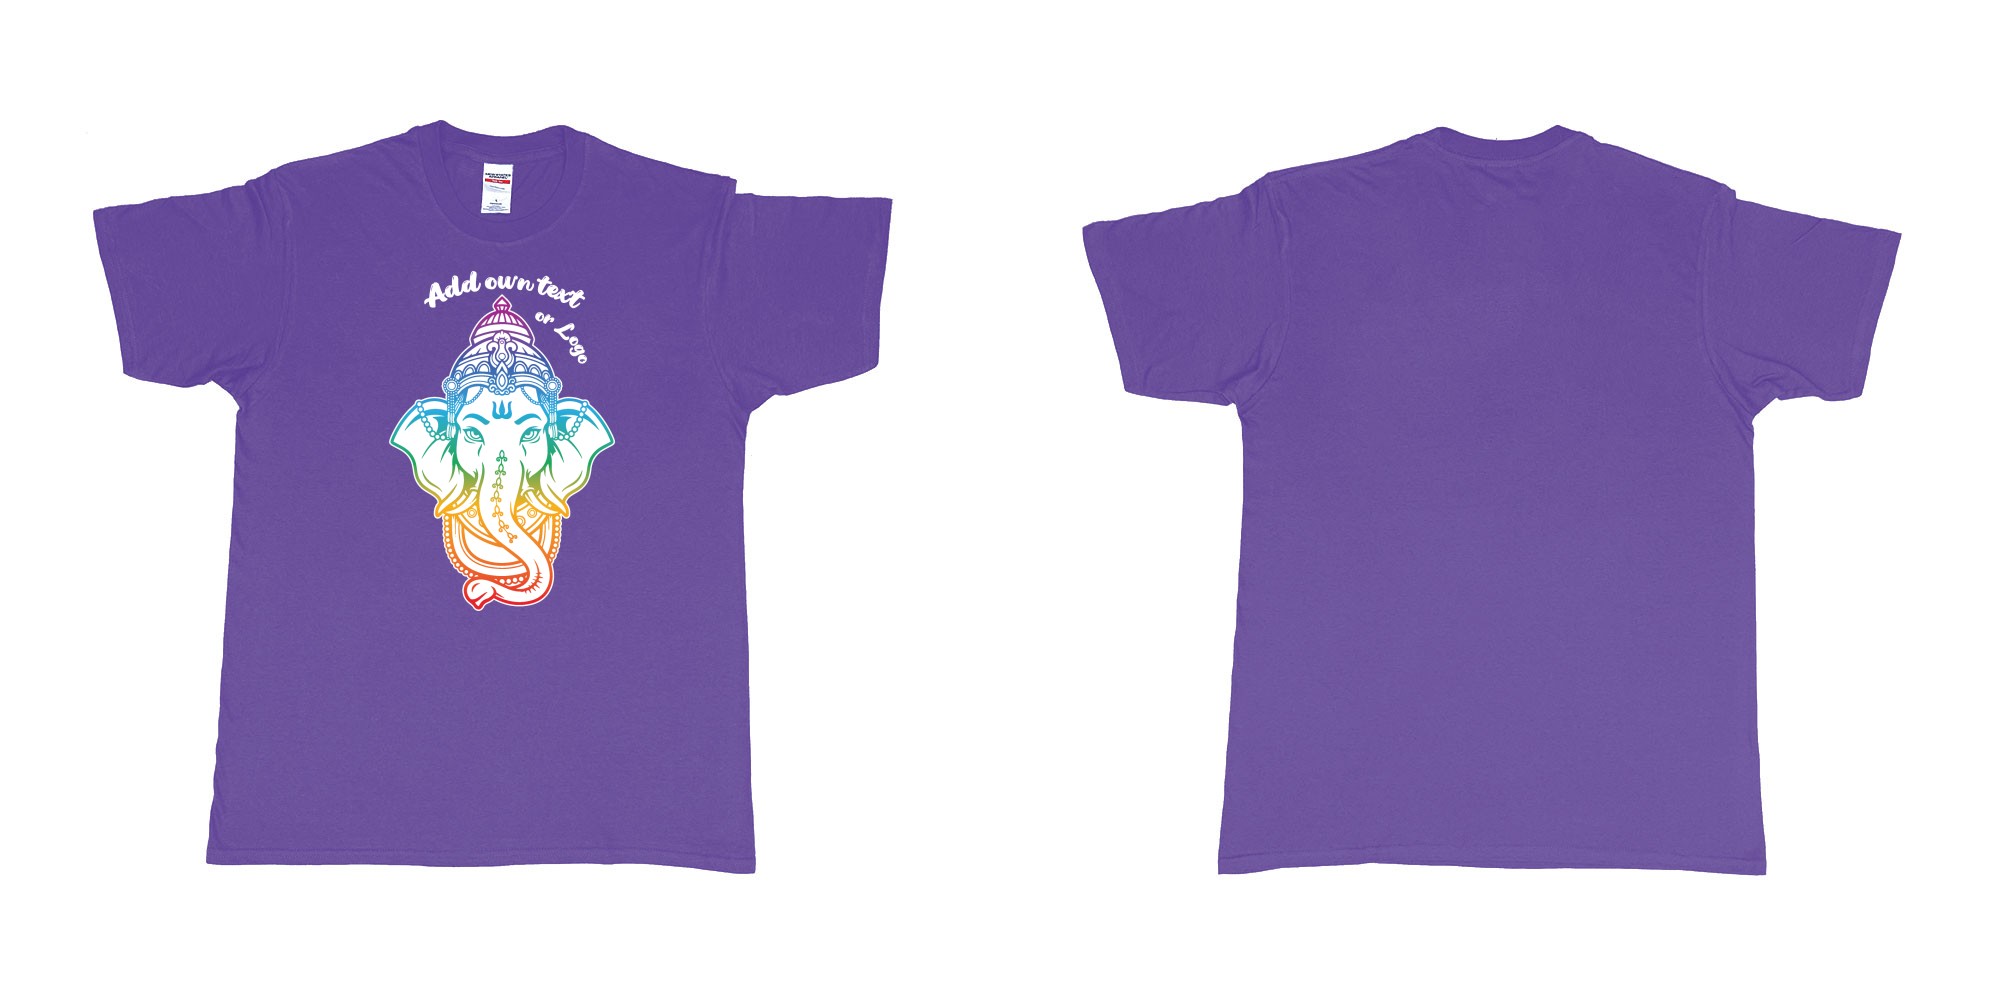 Custom tshirt design ganesha rainbow custom printing in fabric color purple choice your own text made in Bali by The Pirate Way